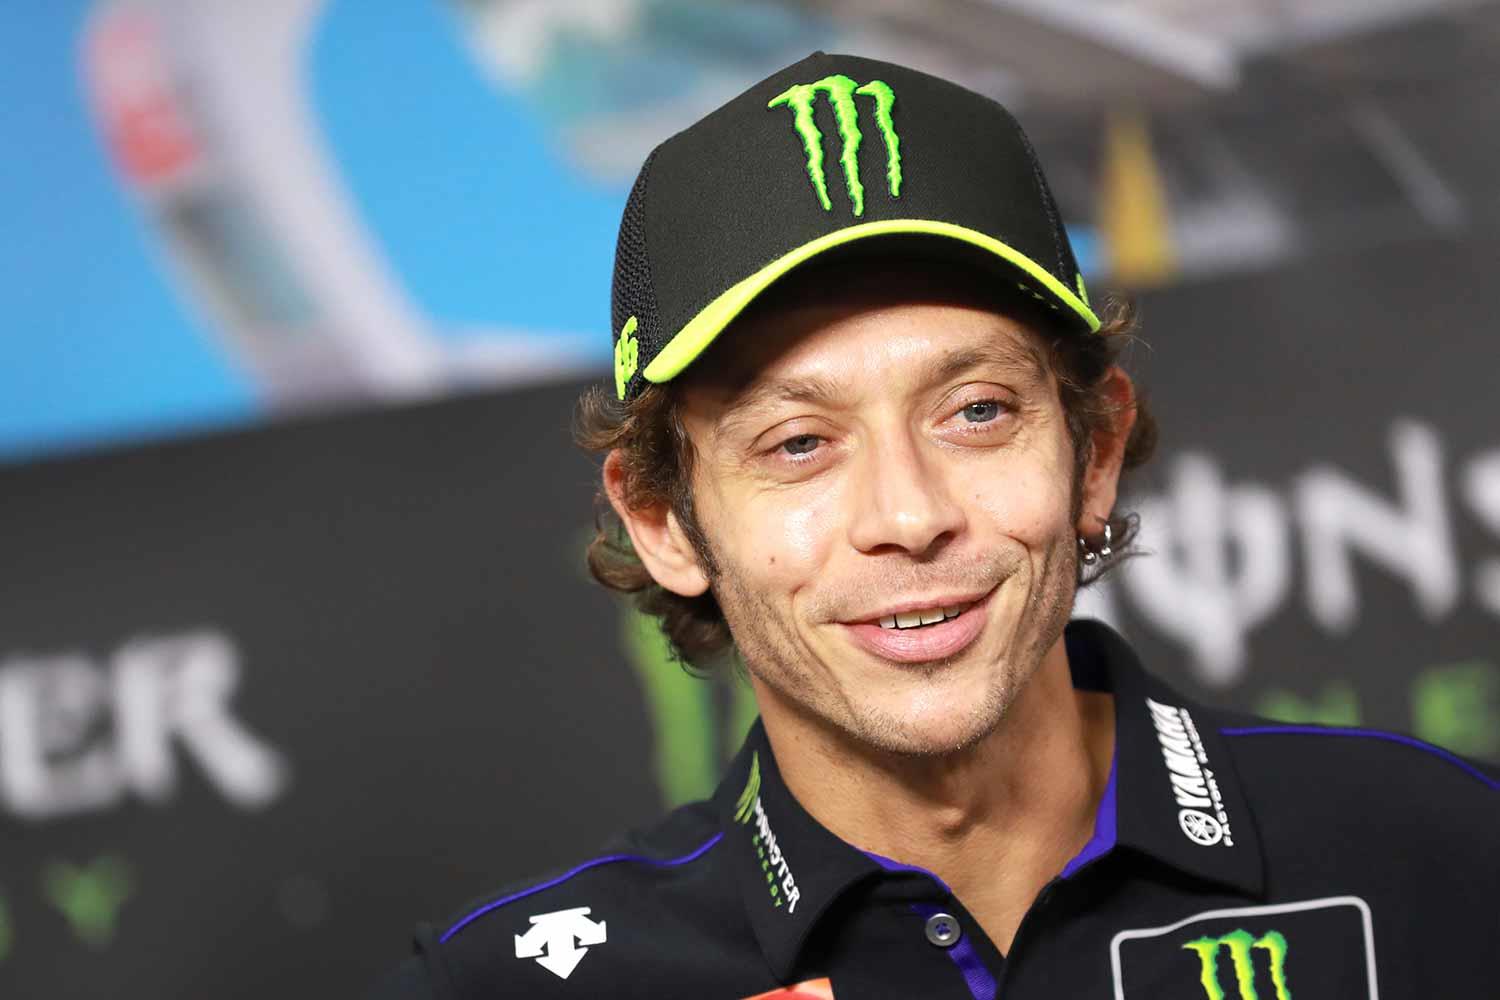 MotoGP: Valentino Rossi to return at Valencia after two negative Covid ...